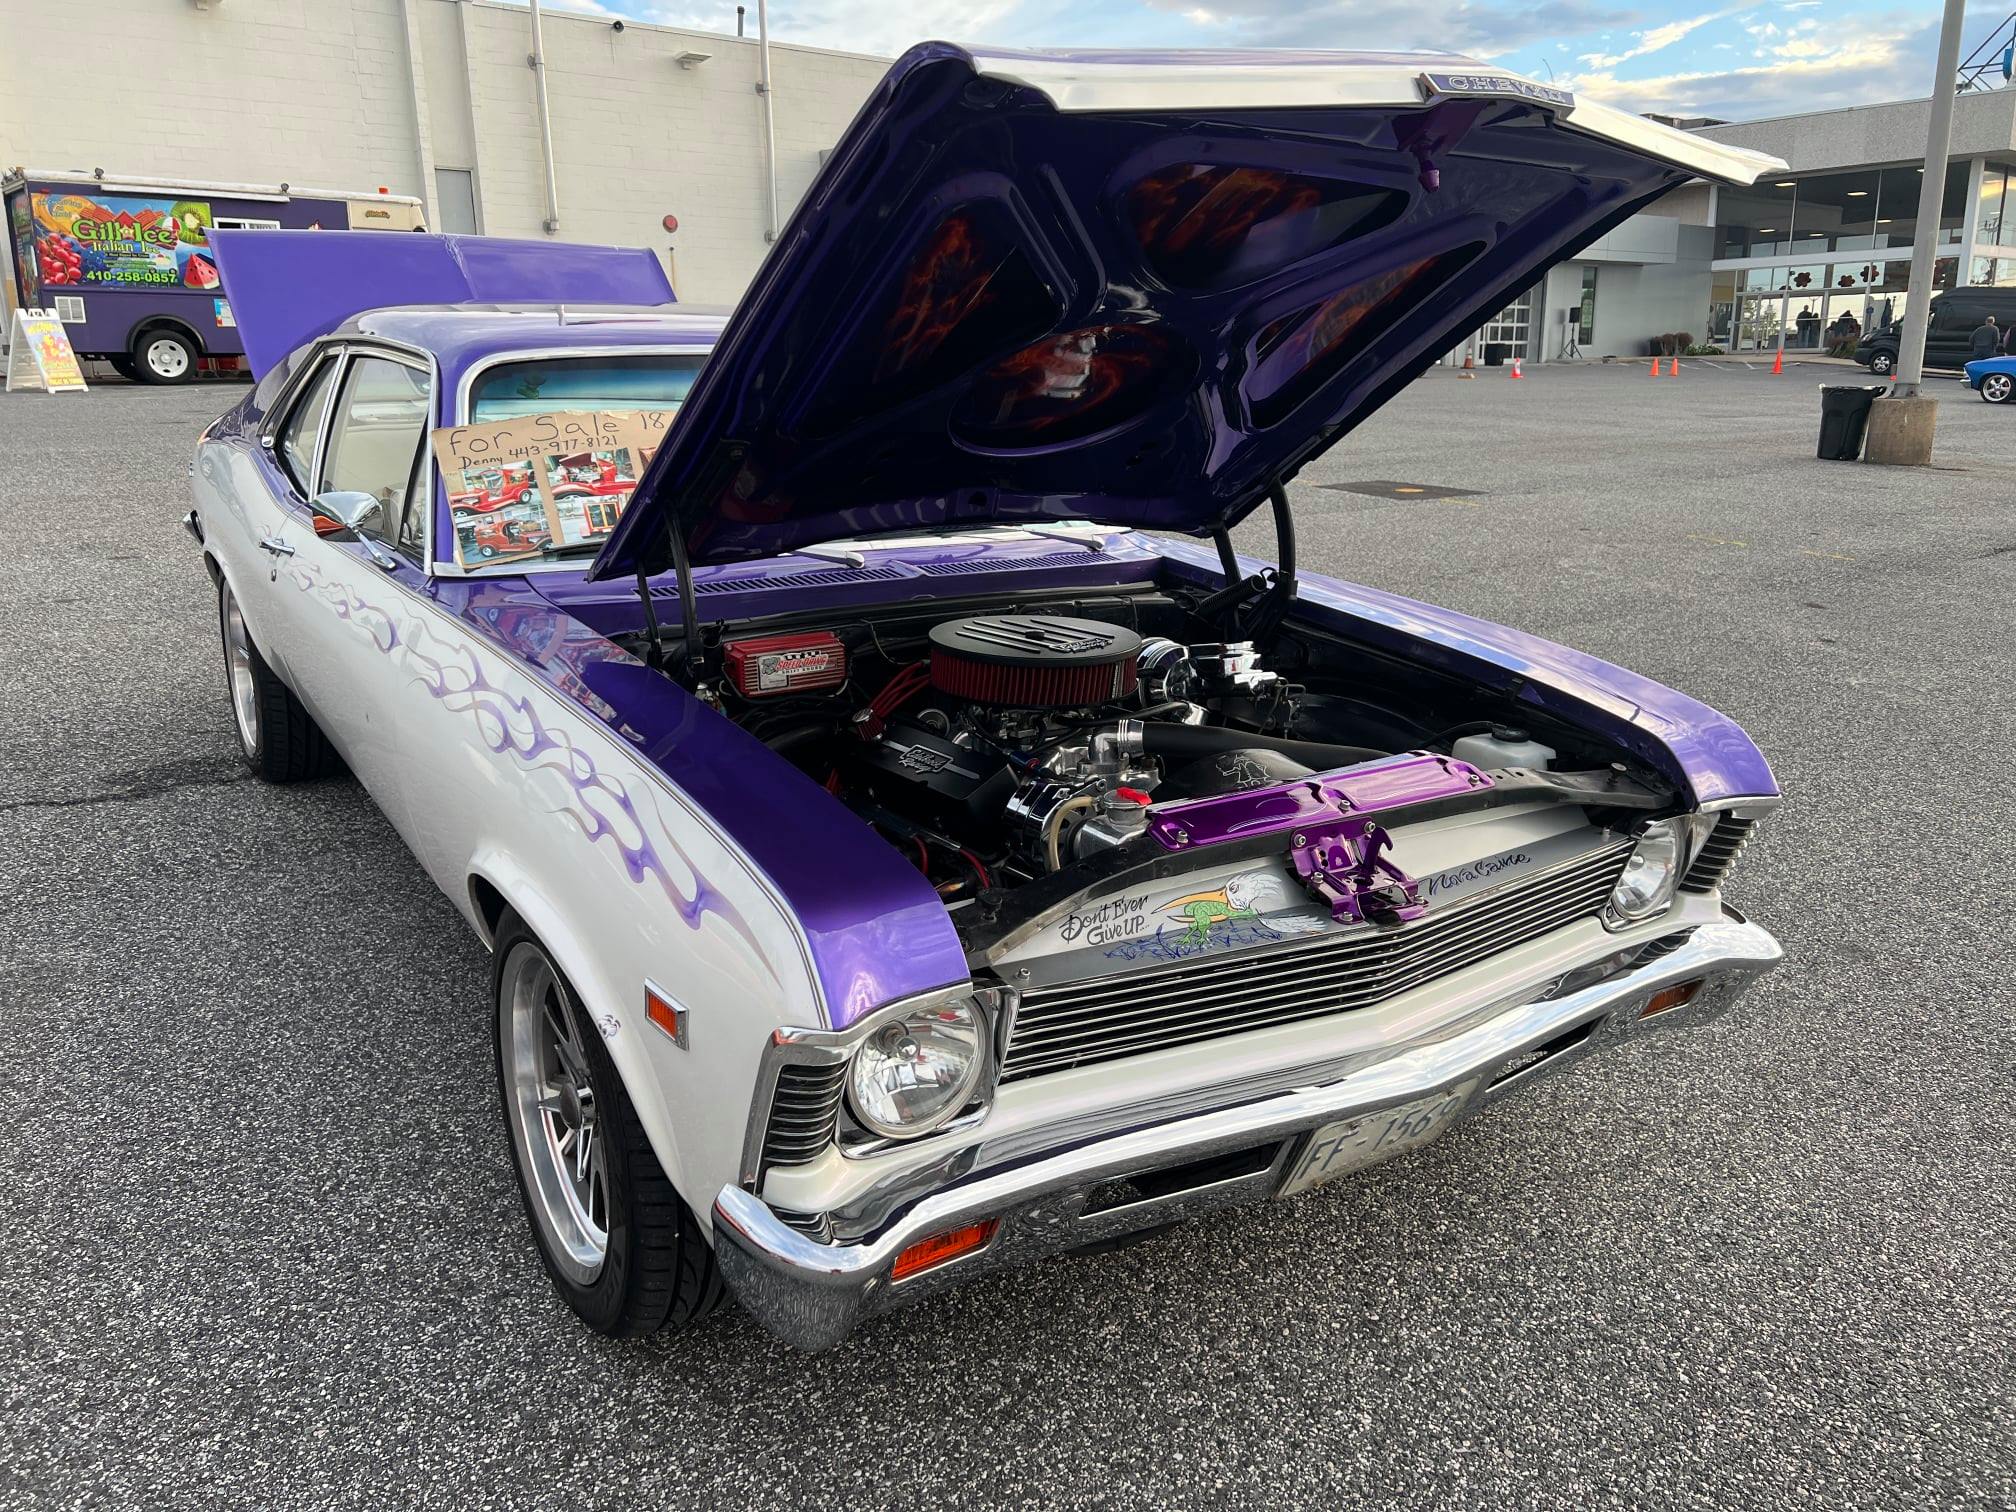 2021 Fall Car Show in Baltimore, MD